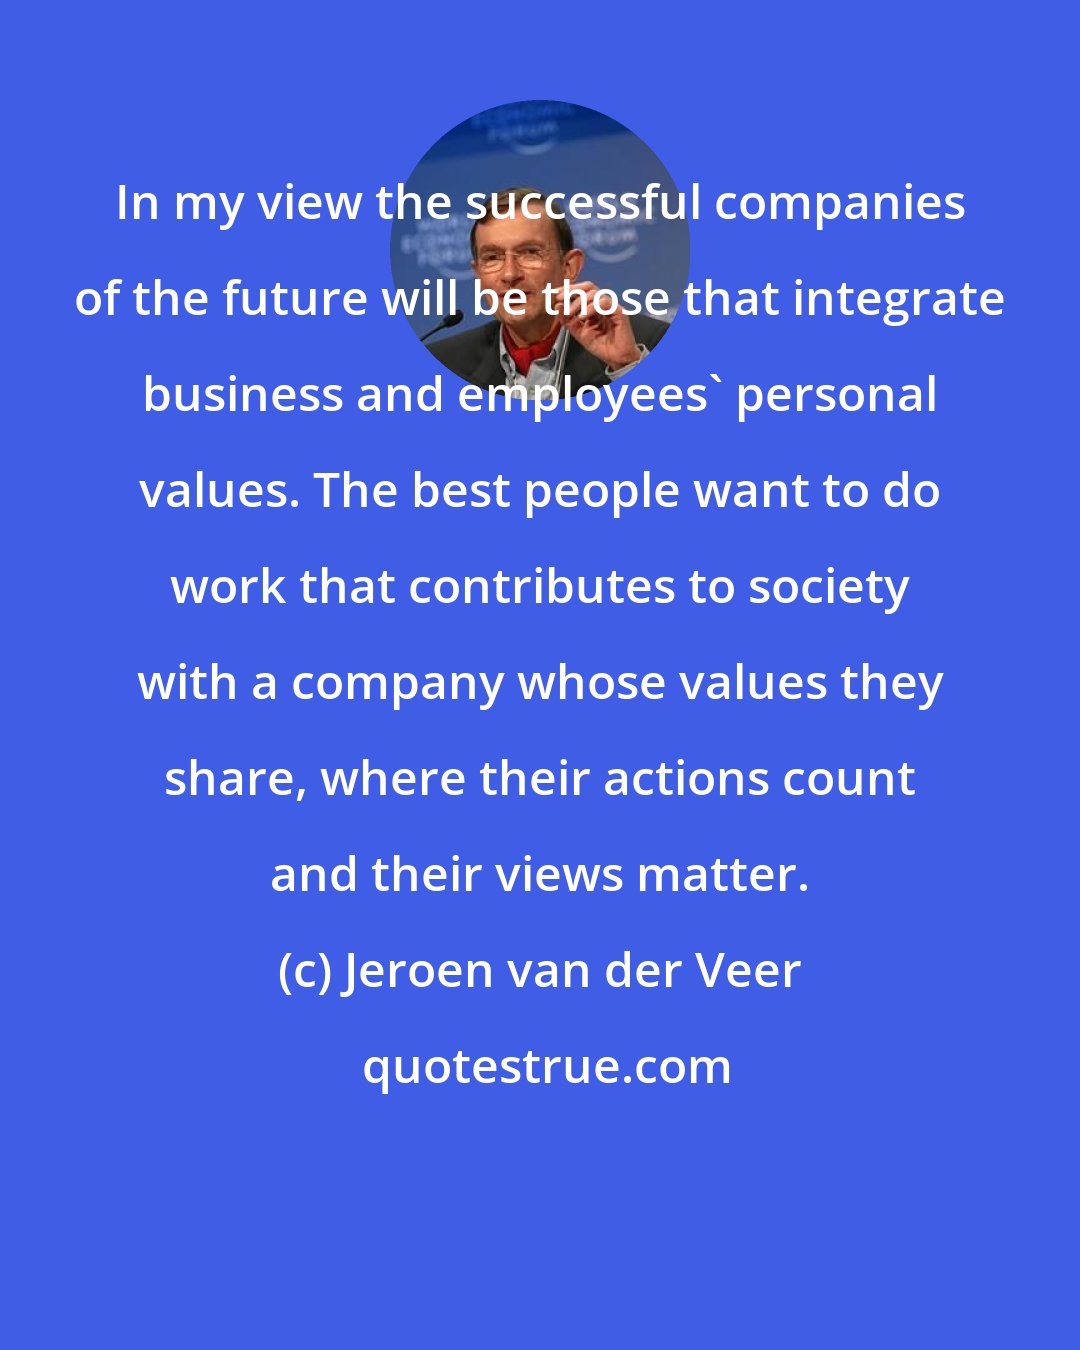 Jeroen van der Veer: In my view the successful companies of the future will be those that integrate business and employees' personal values. The best people want to do work that contributes to society with a company whose values they share, where their actions count and their views matter.